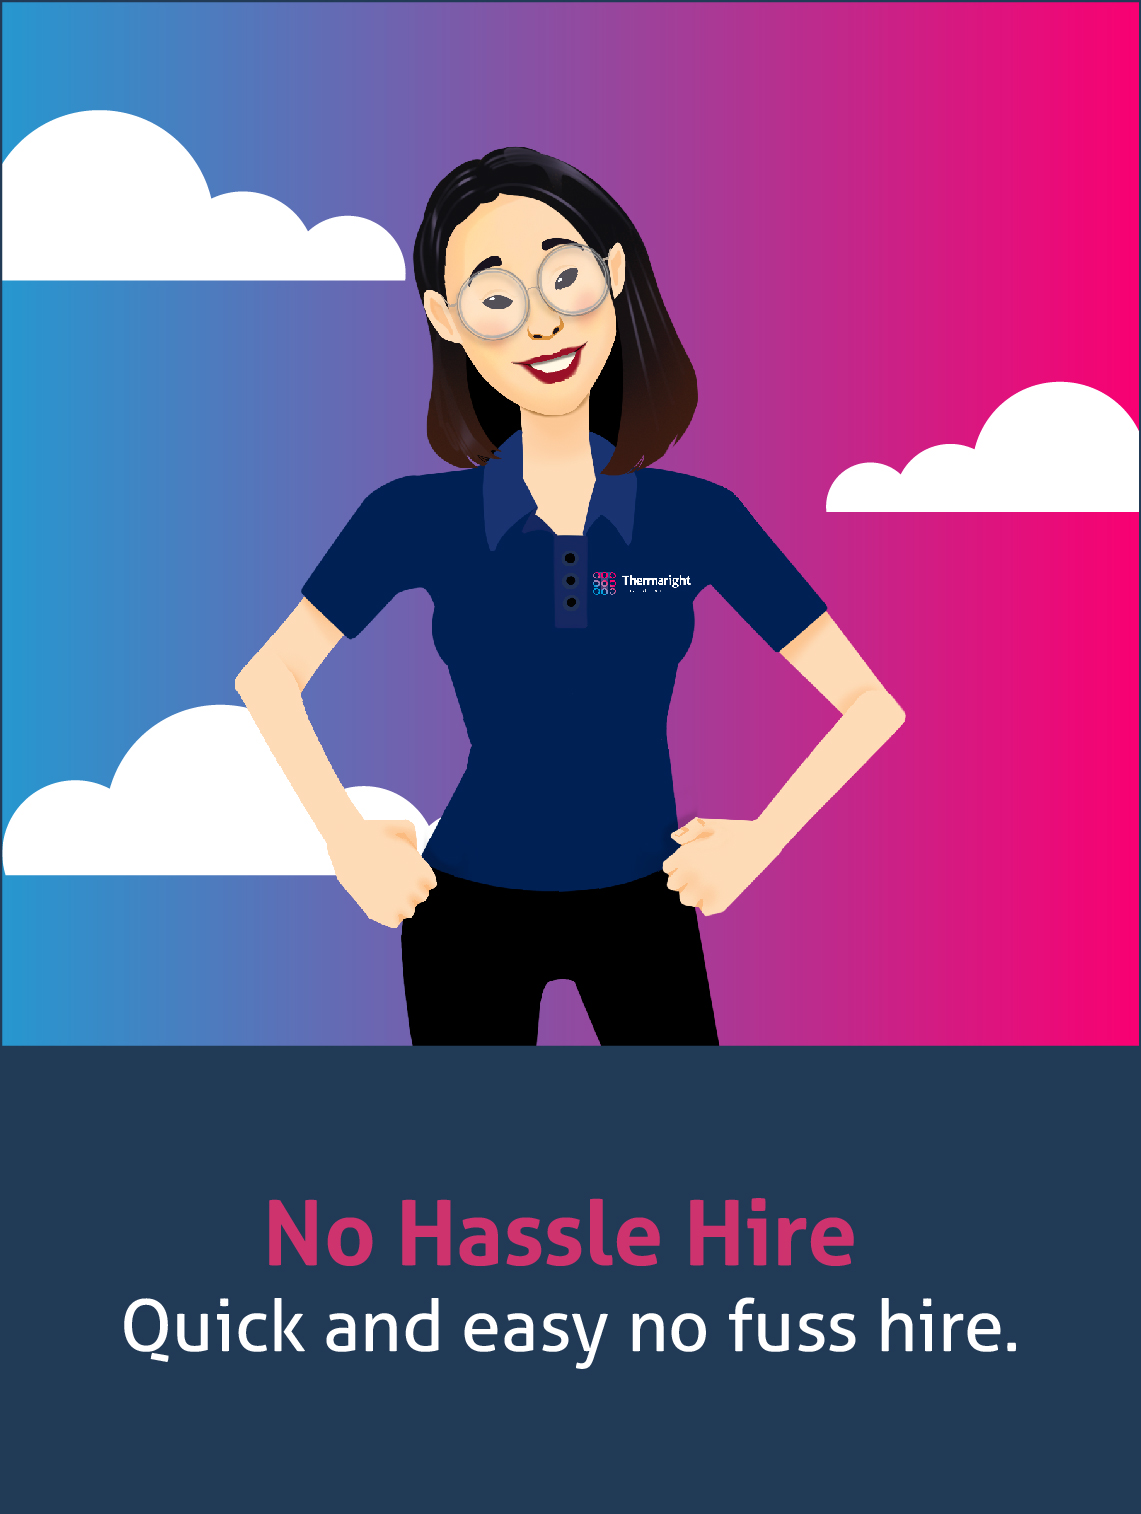 No hassle hire. Quick and easy, no fuss hire.